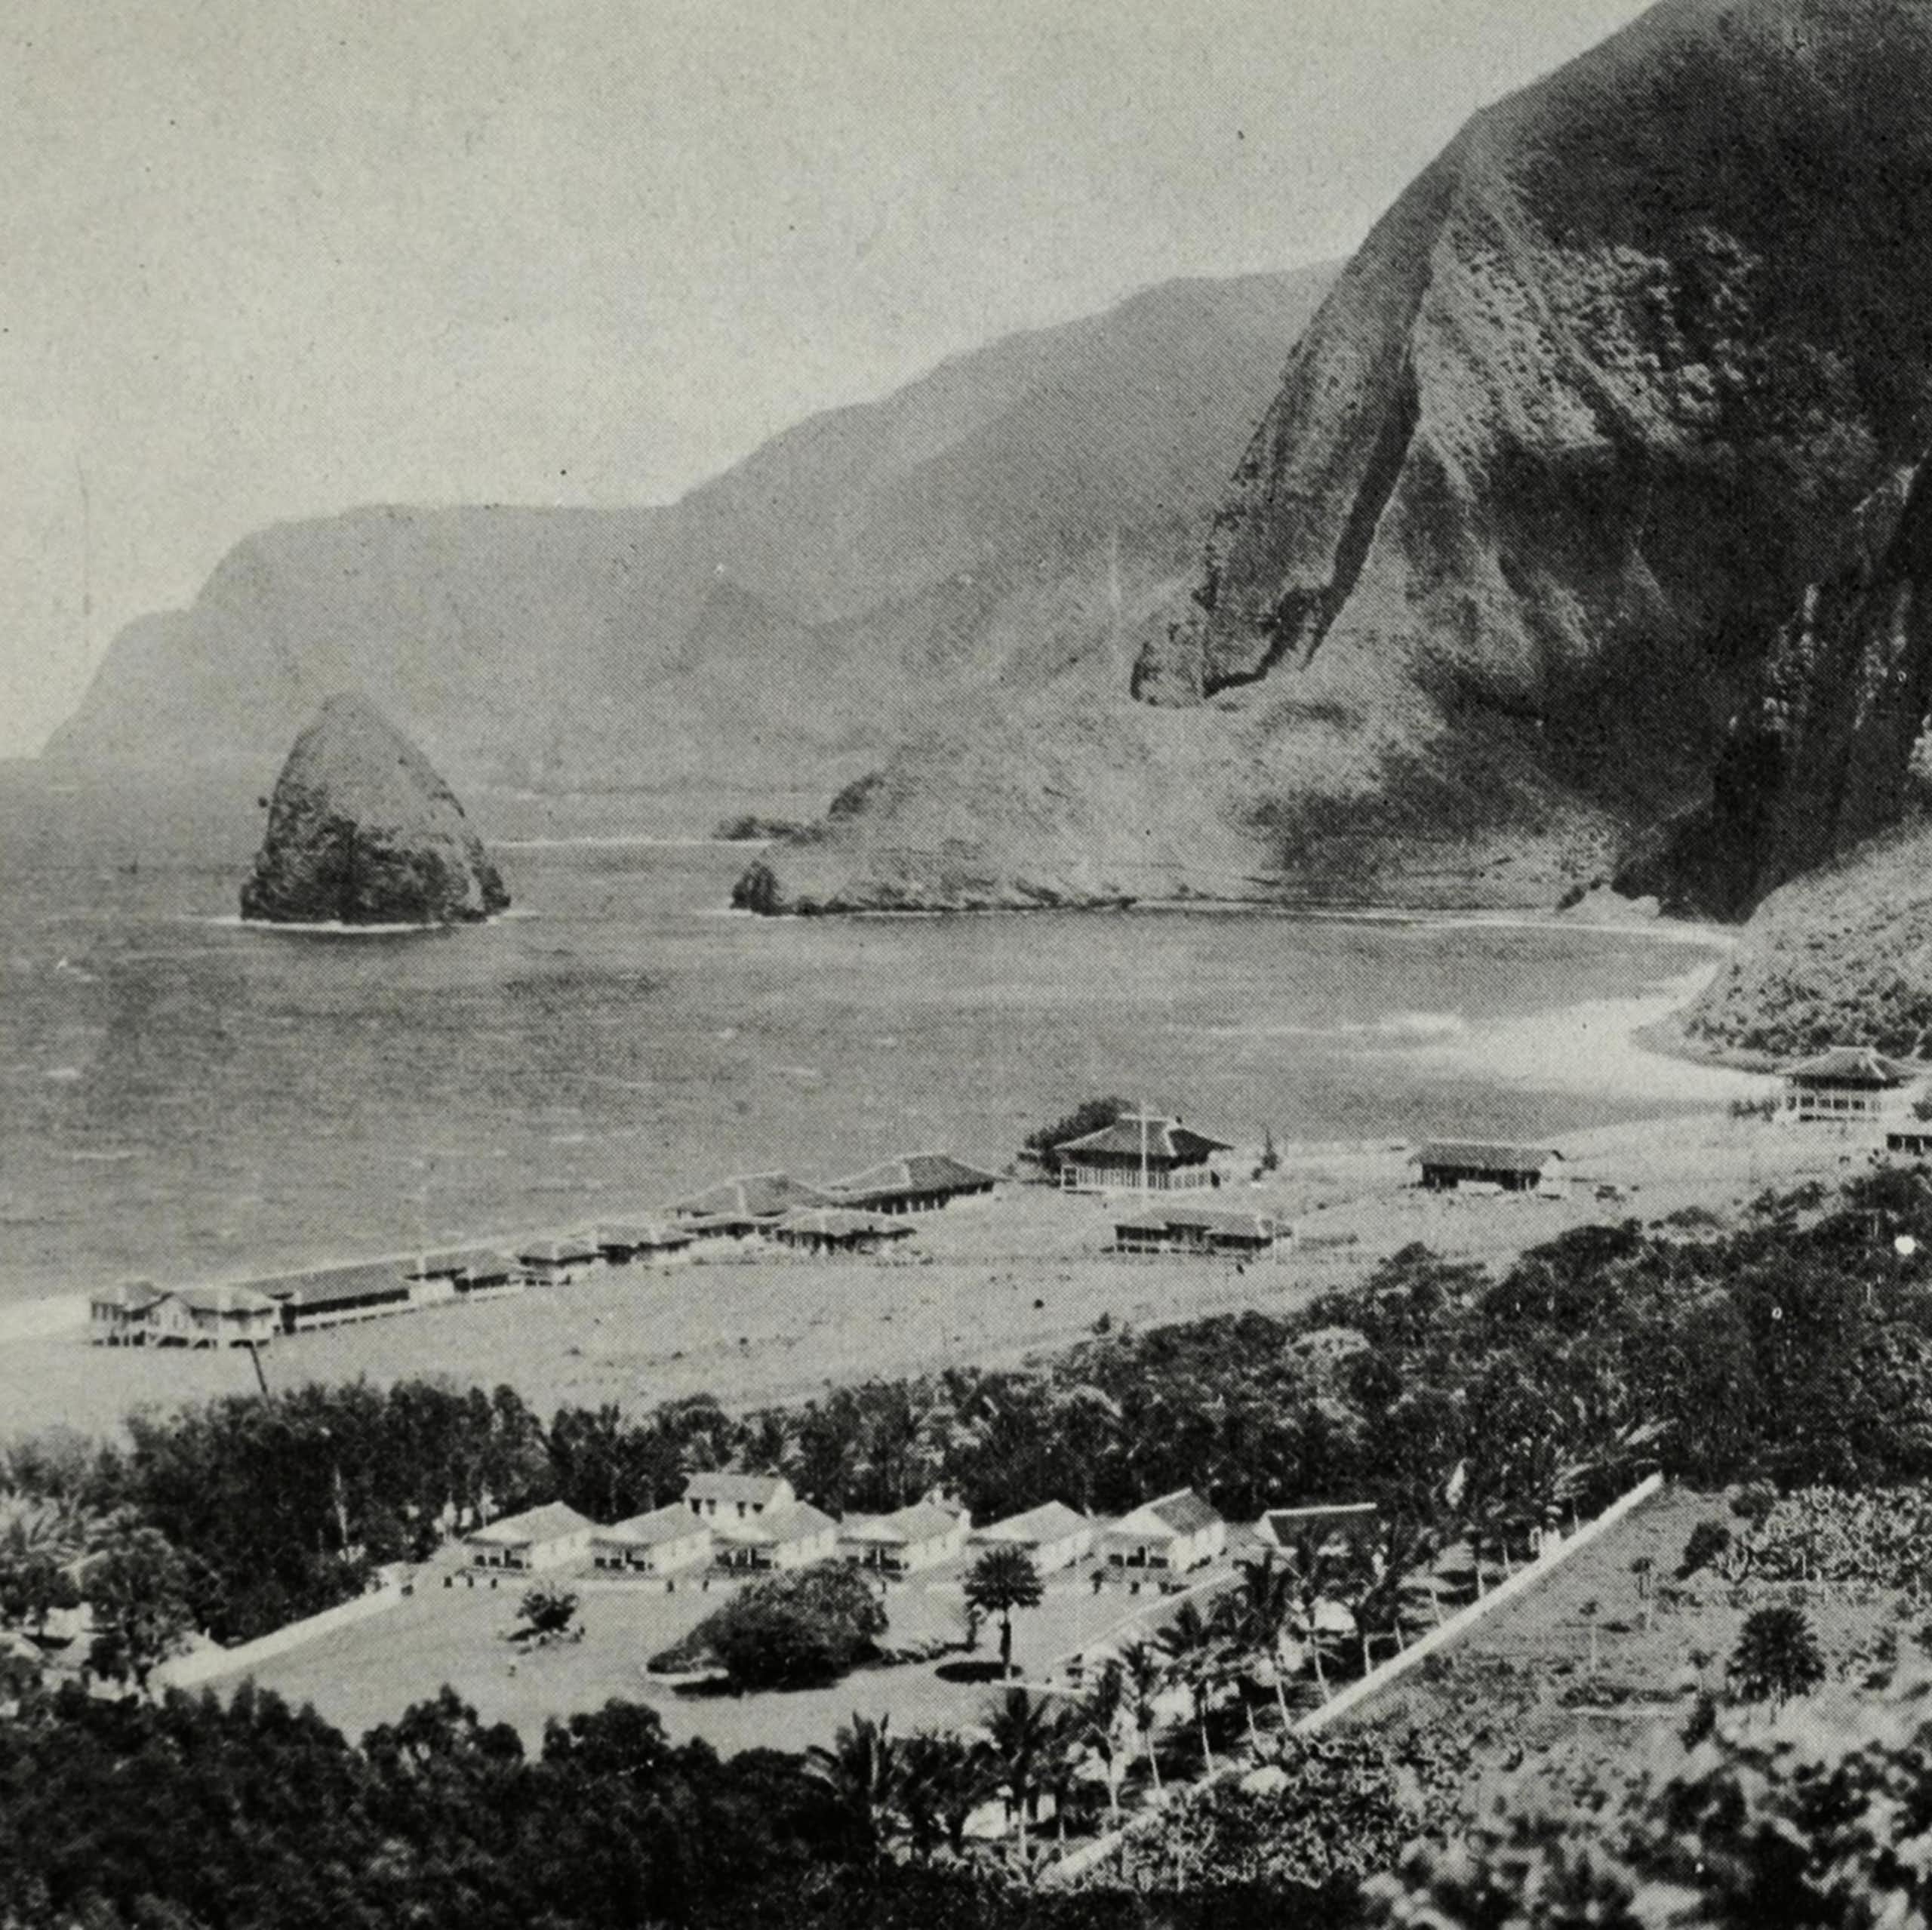 A black and white photo of a small settlement of buildings on a coast, with cliffs visible in the background.